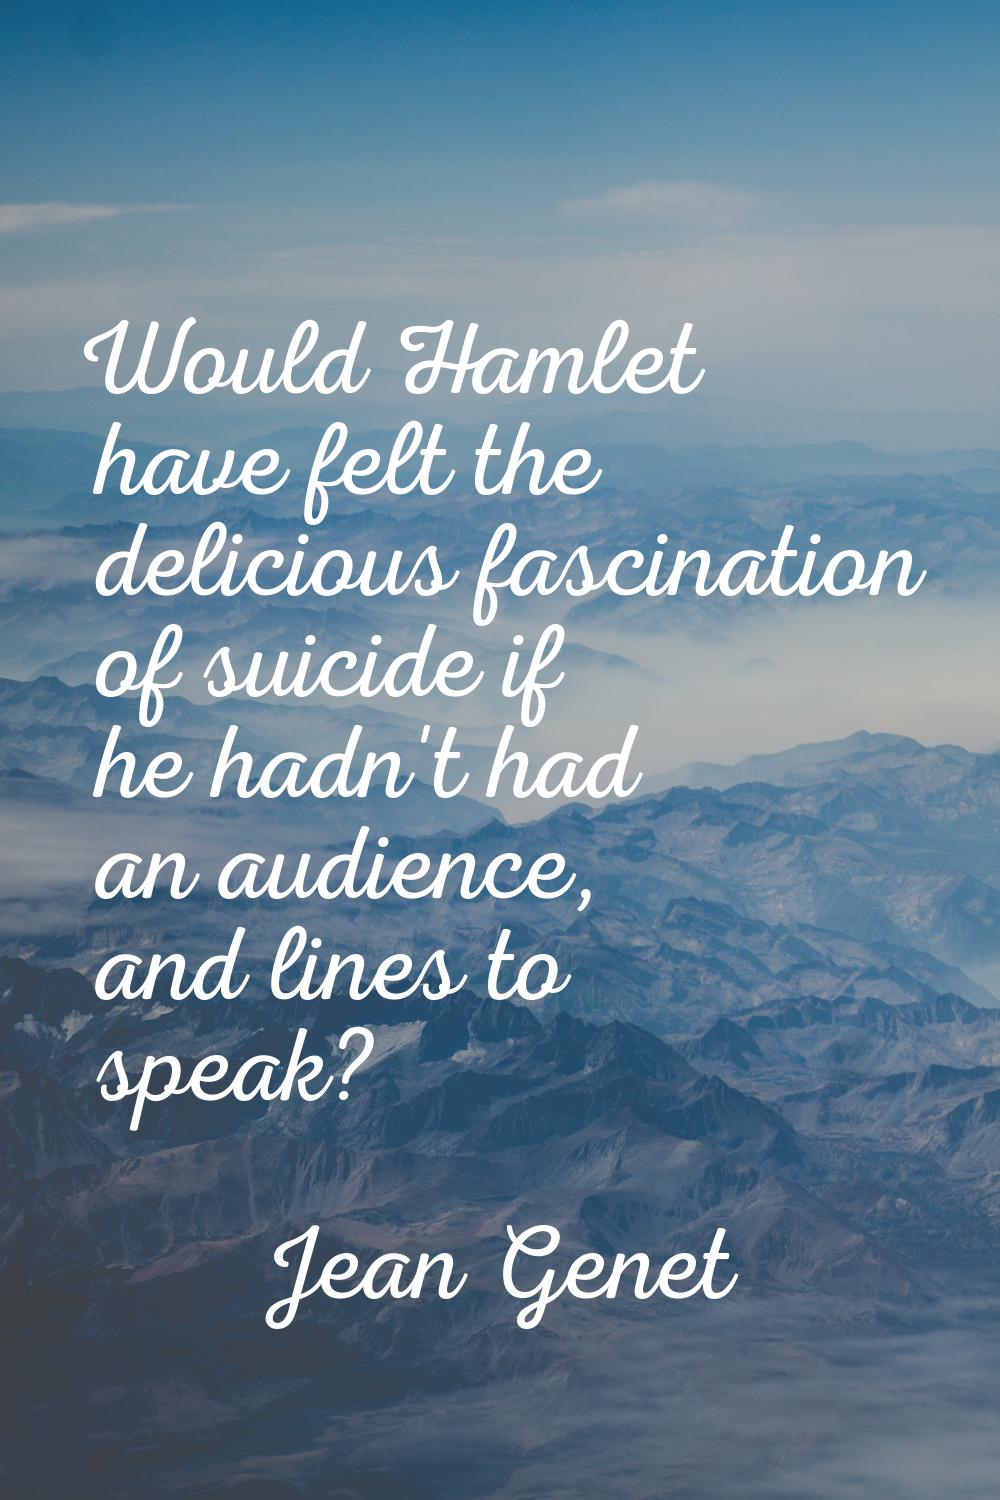 Would Hamlet have felt the delicious fascination of suicide if he hadn't had an audience, and lines